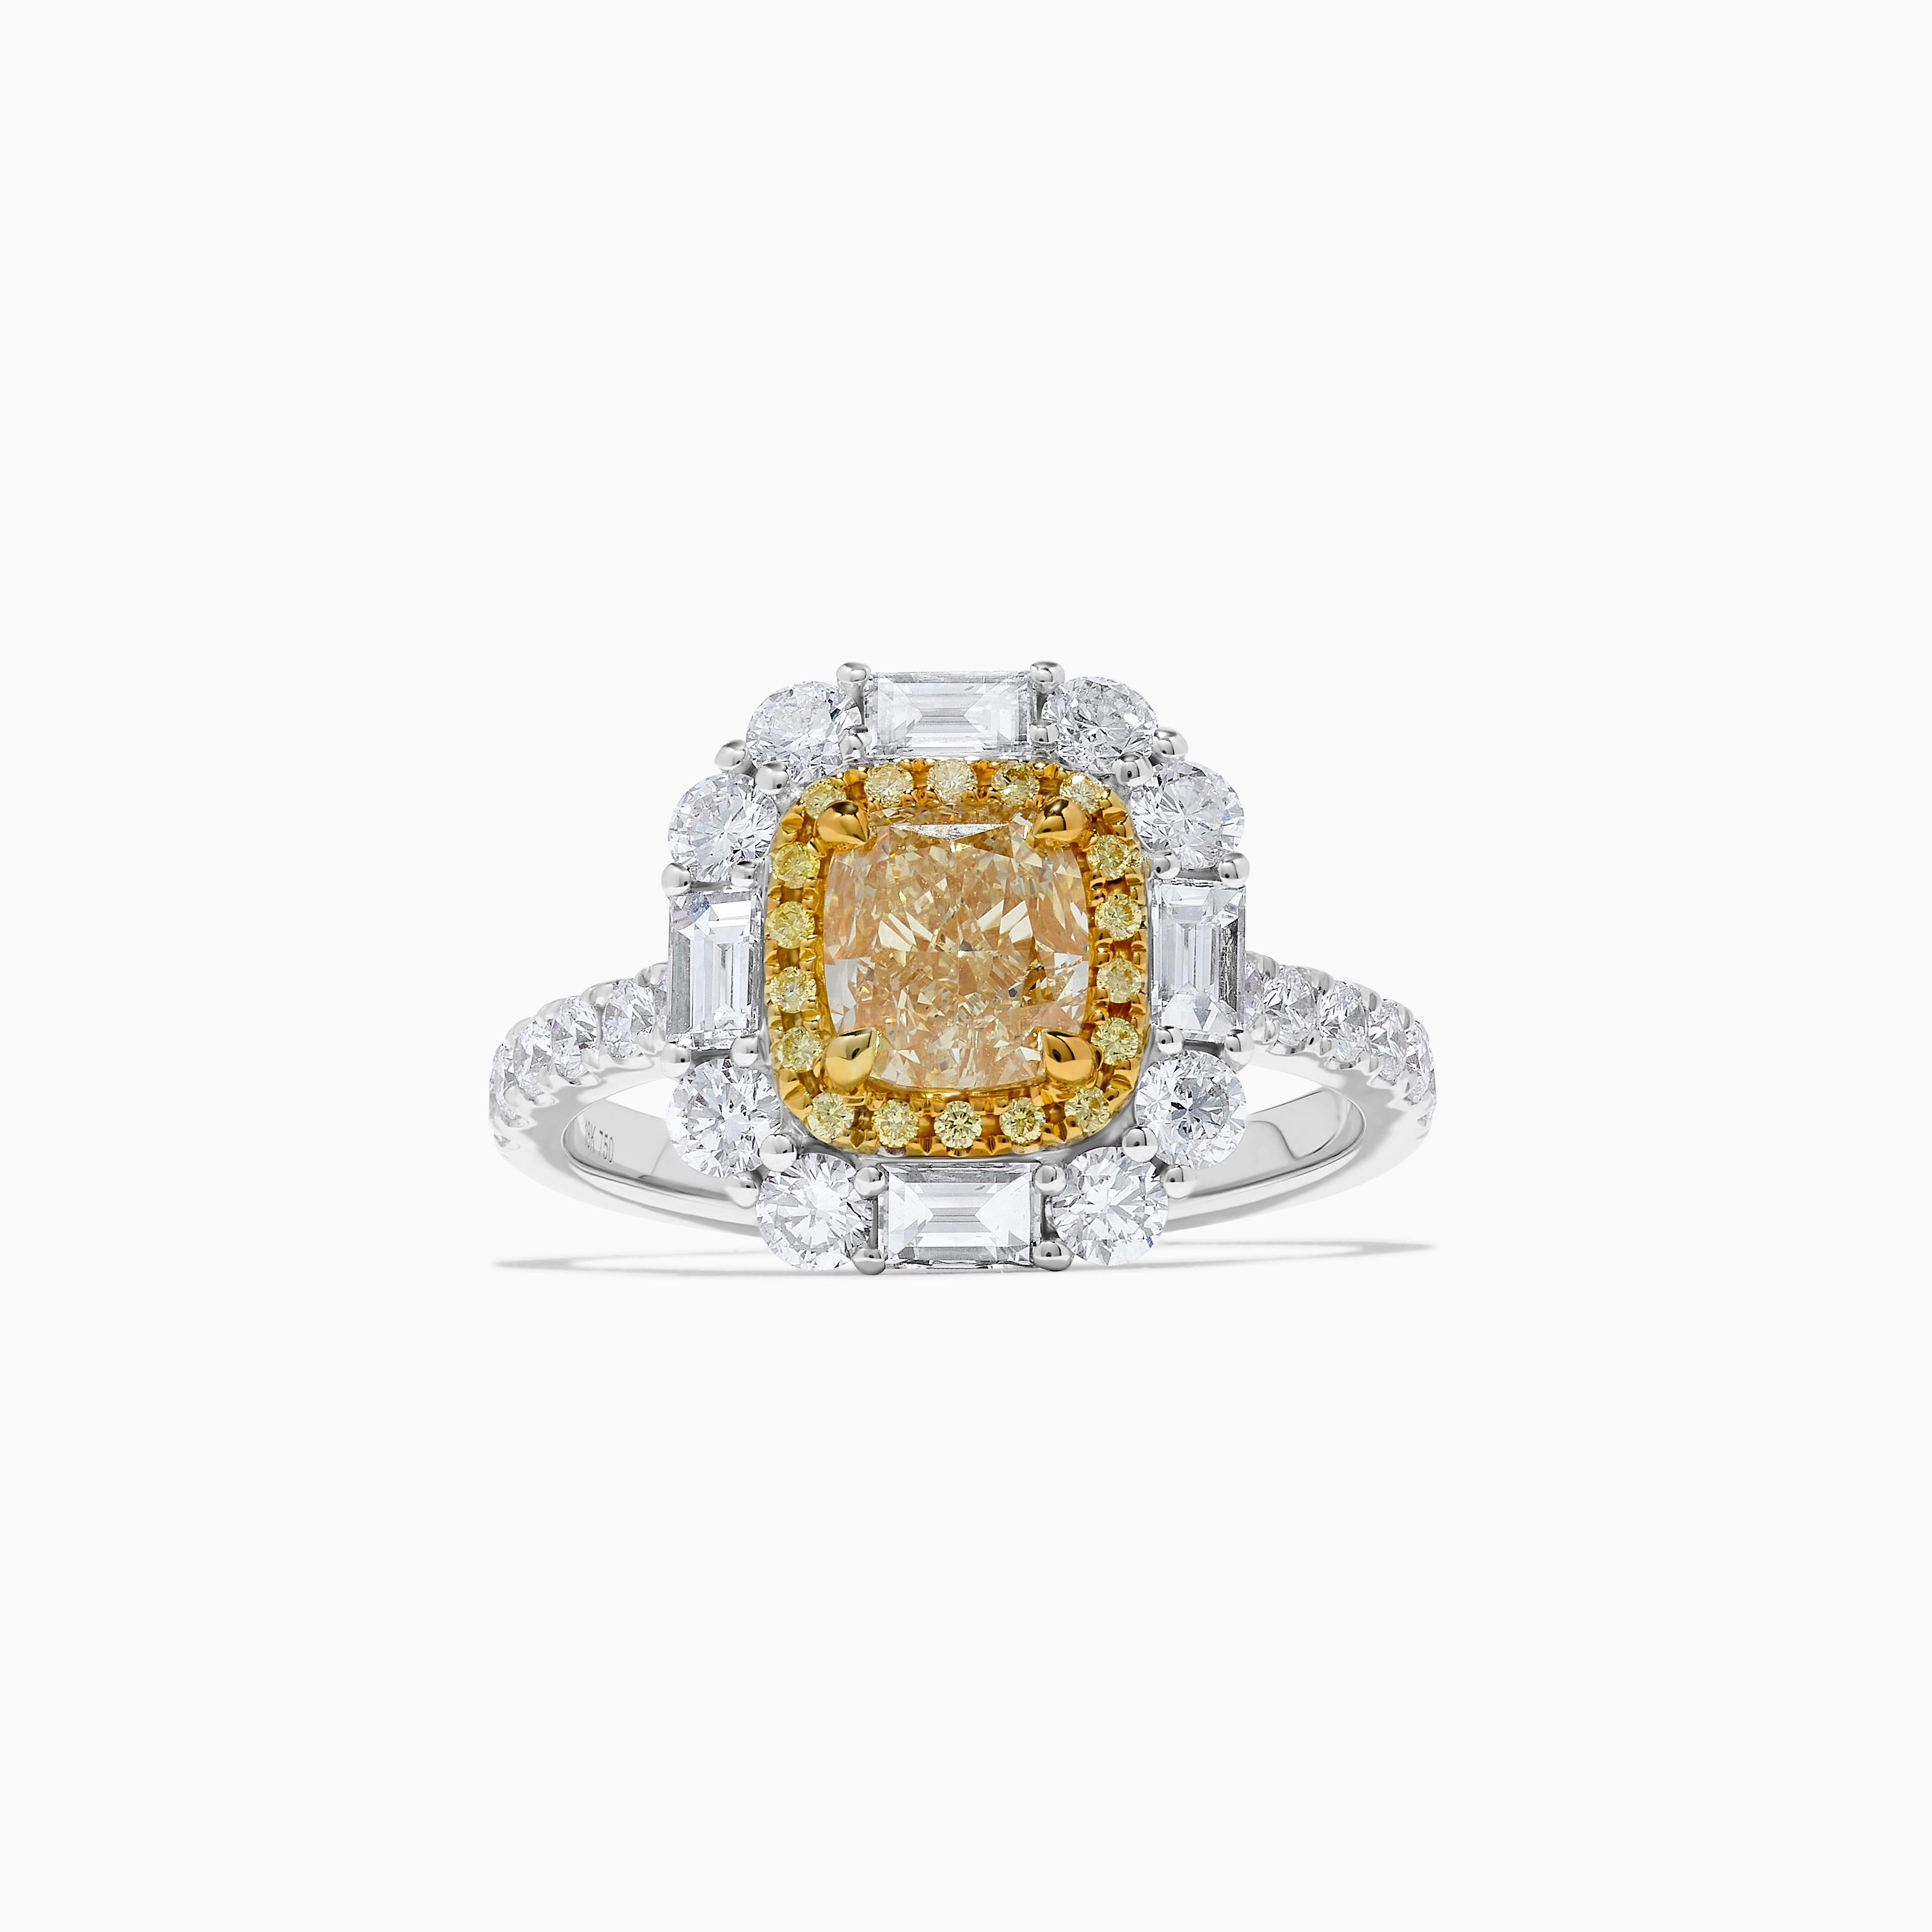 Cushion Cut GIA Certified Natural Yellow Cushion Diamond 2.45 Carat TW Gold Cocktail Ring For Sale